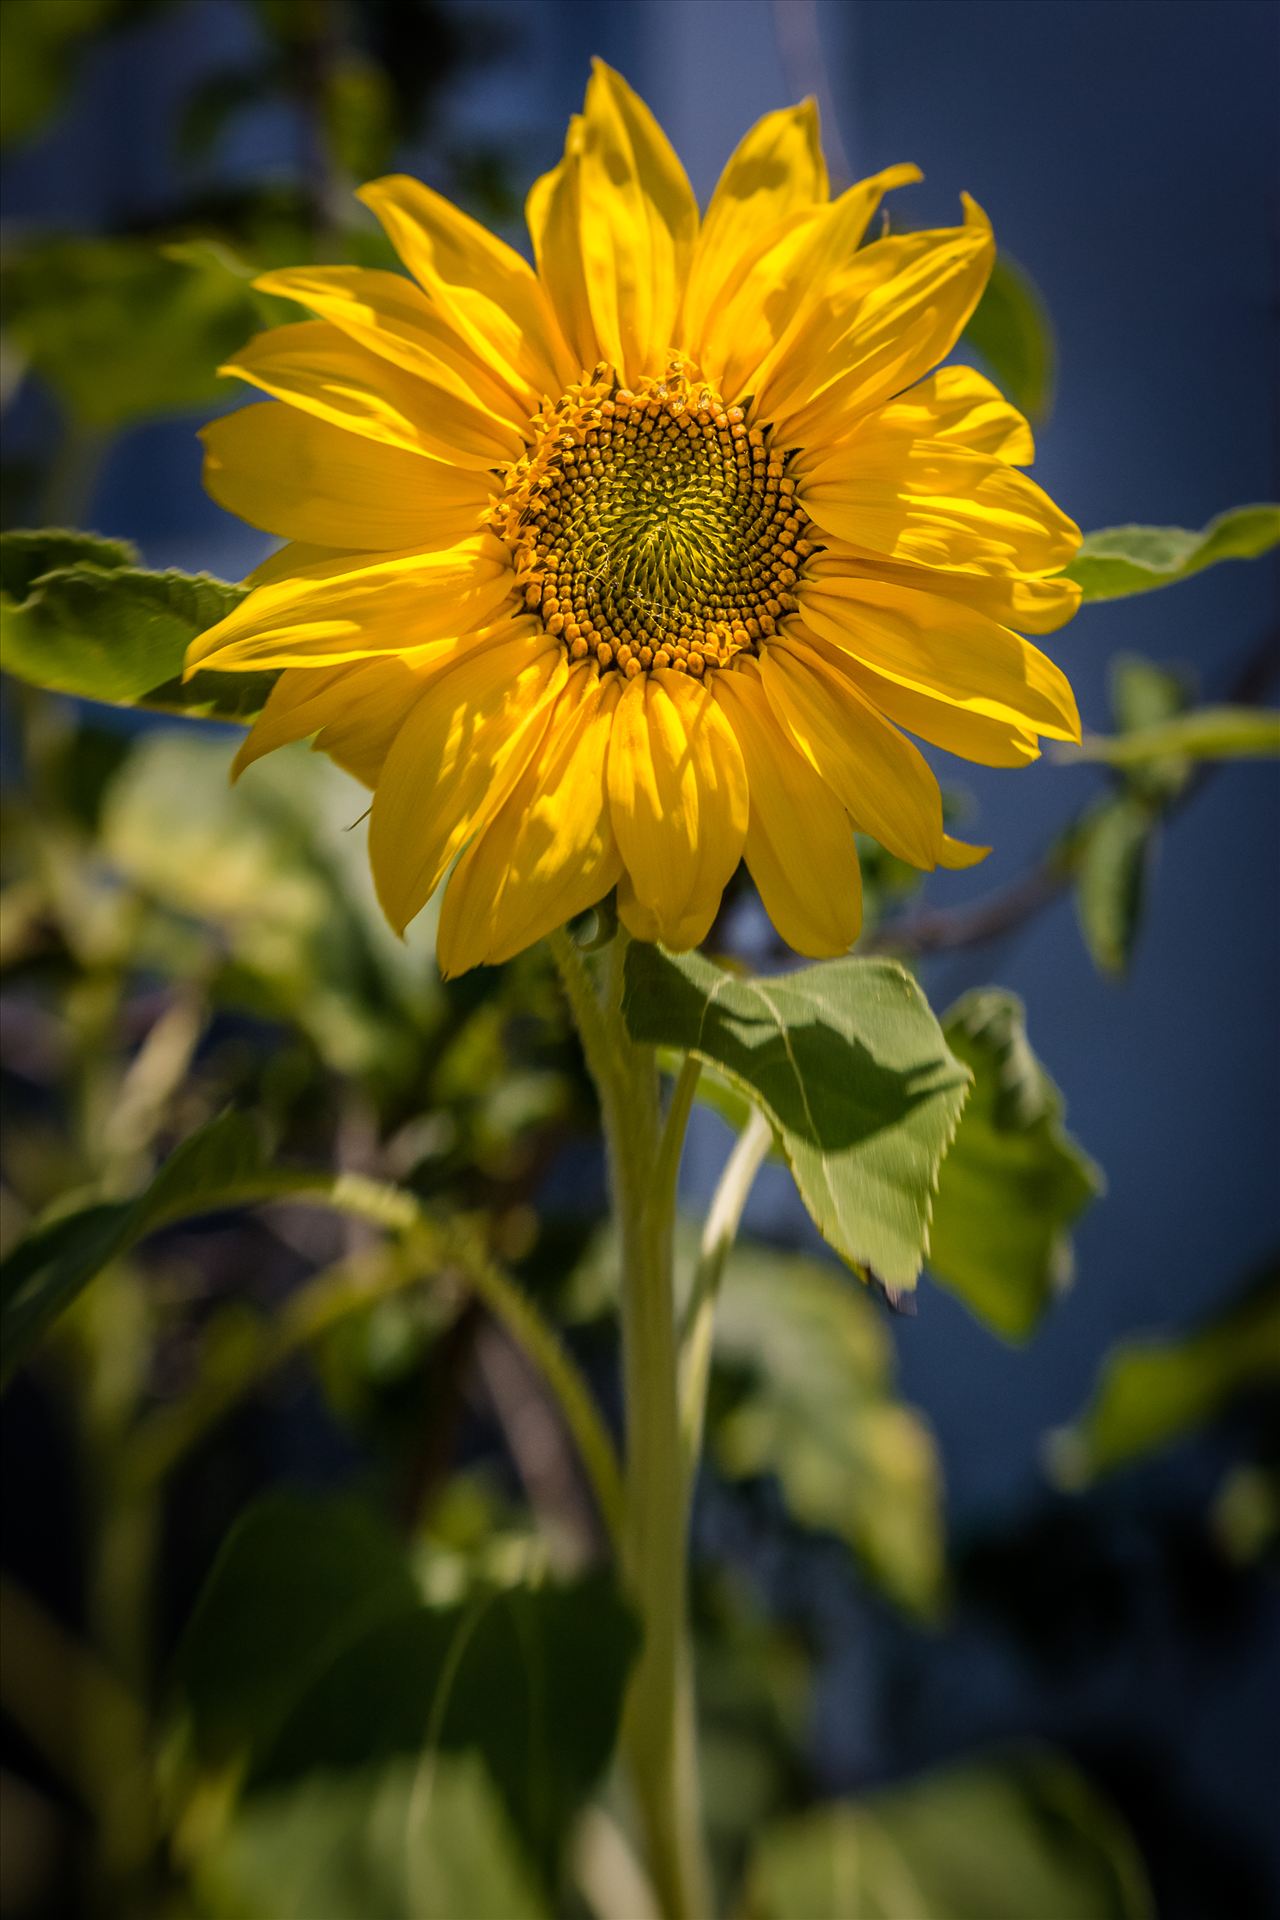 Sunflower Smiles.jpg Lone sunflower basking in the last light of a California day by Sarah Williams